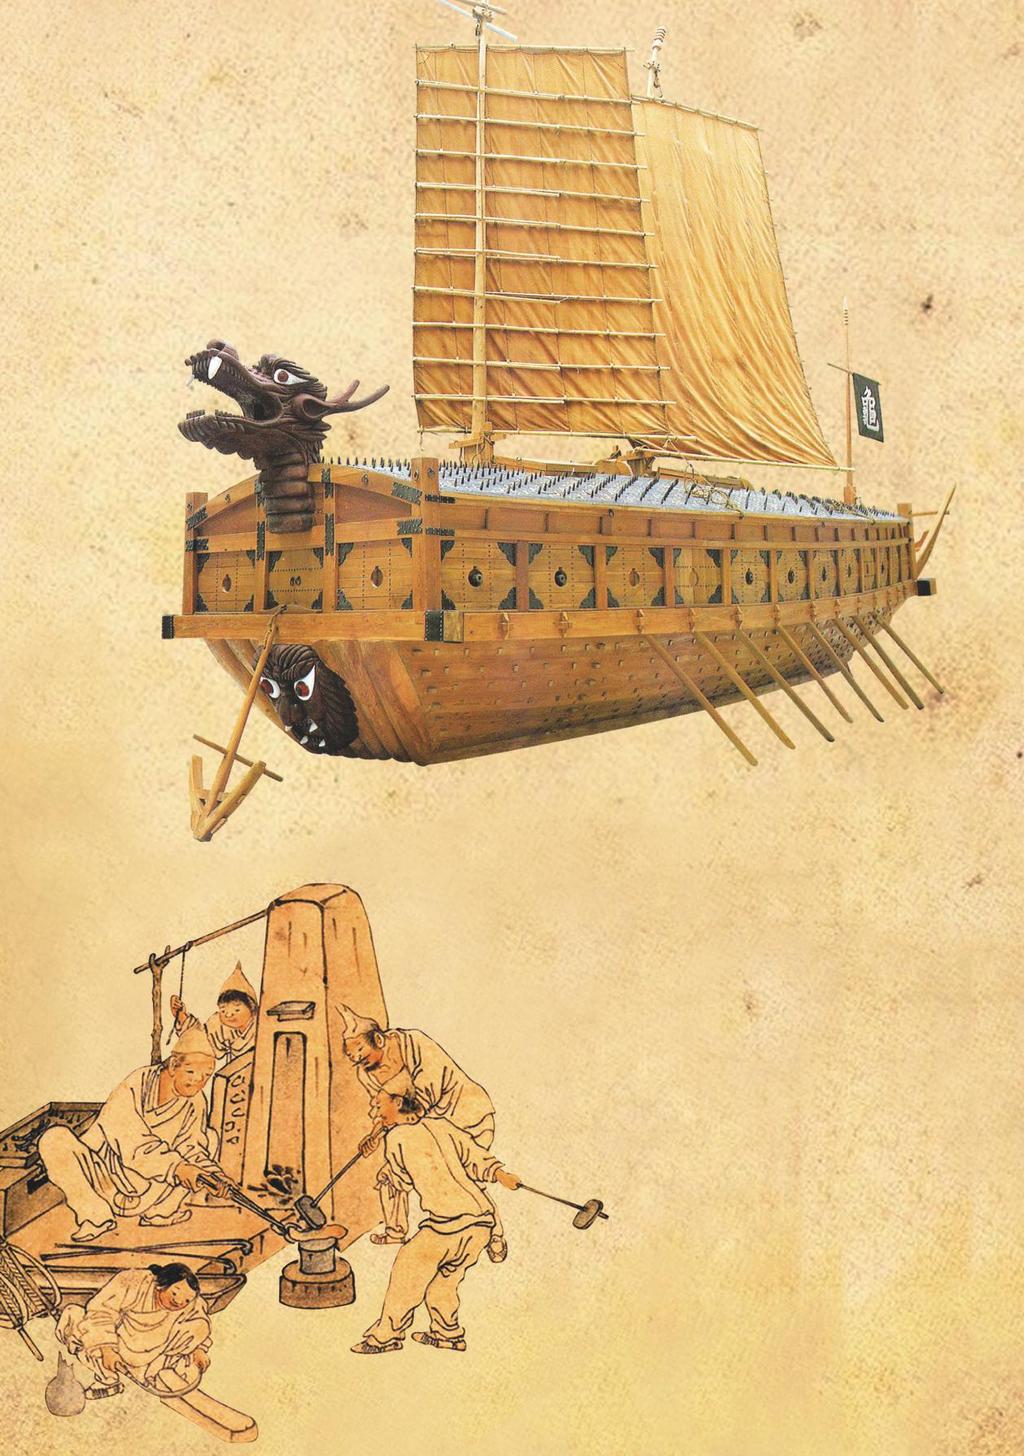 Turtle Ship built by Admiral Yi Sun-shin that played a remarkable role during the Japanese